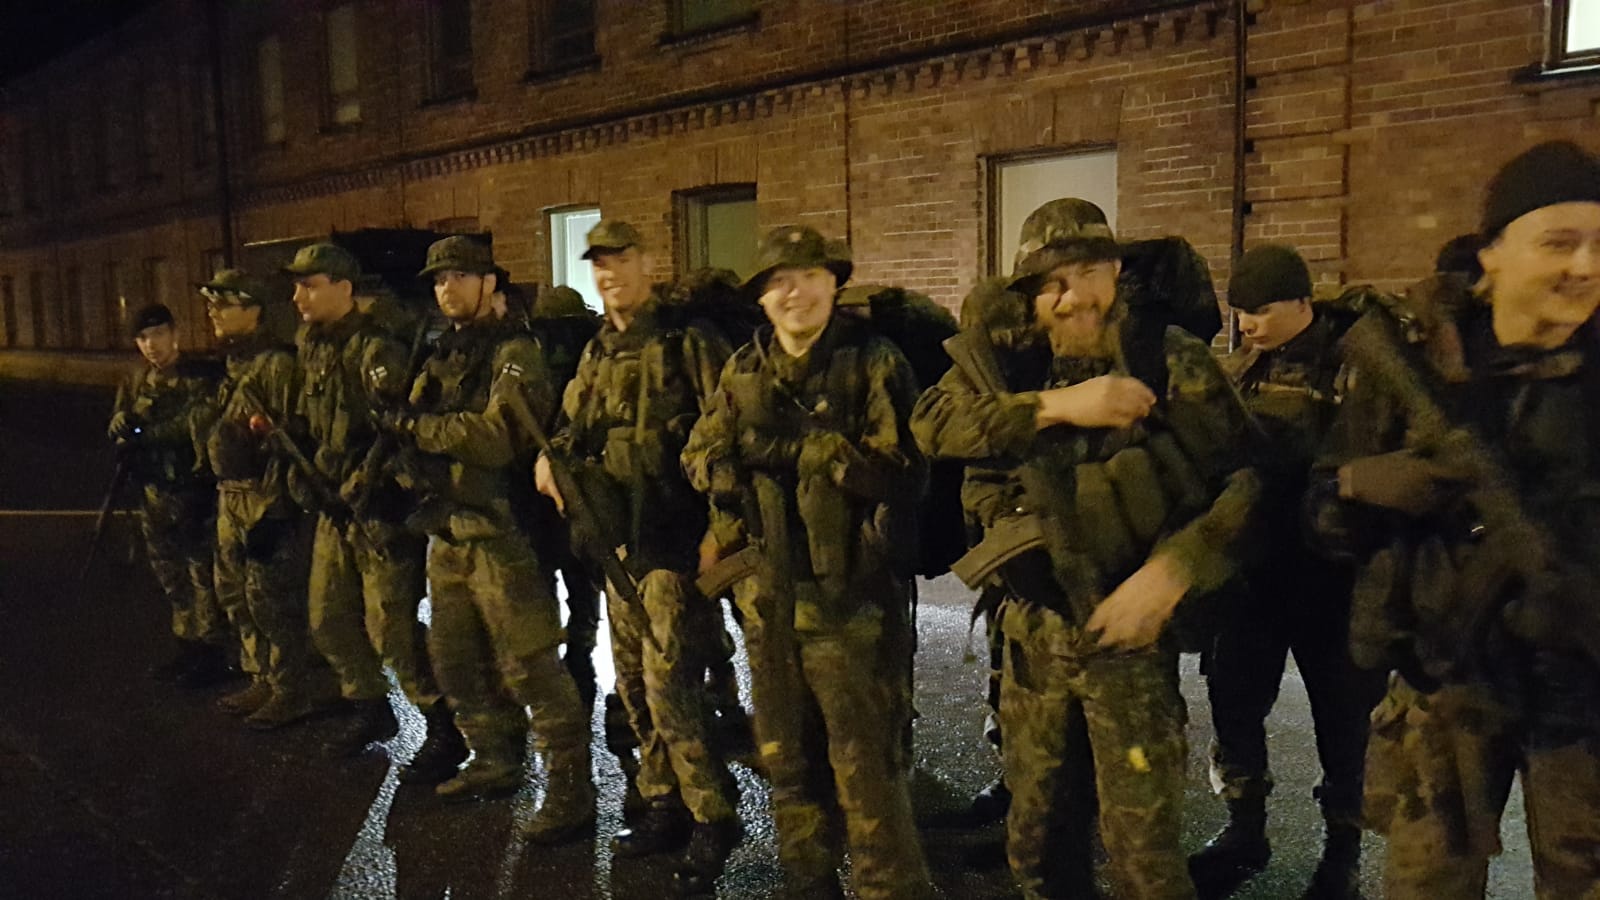 Smiling soldiers in dim light a row in front of the red brick building.